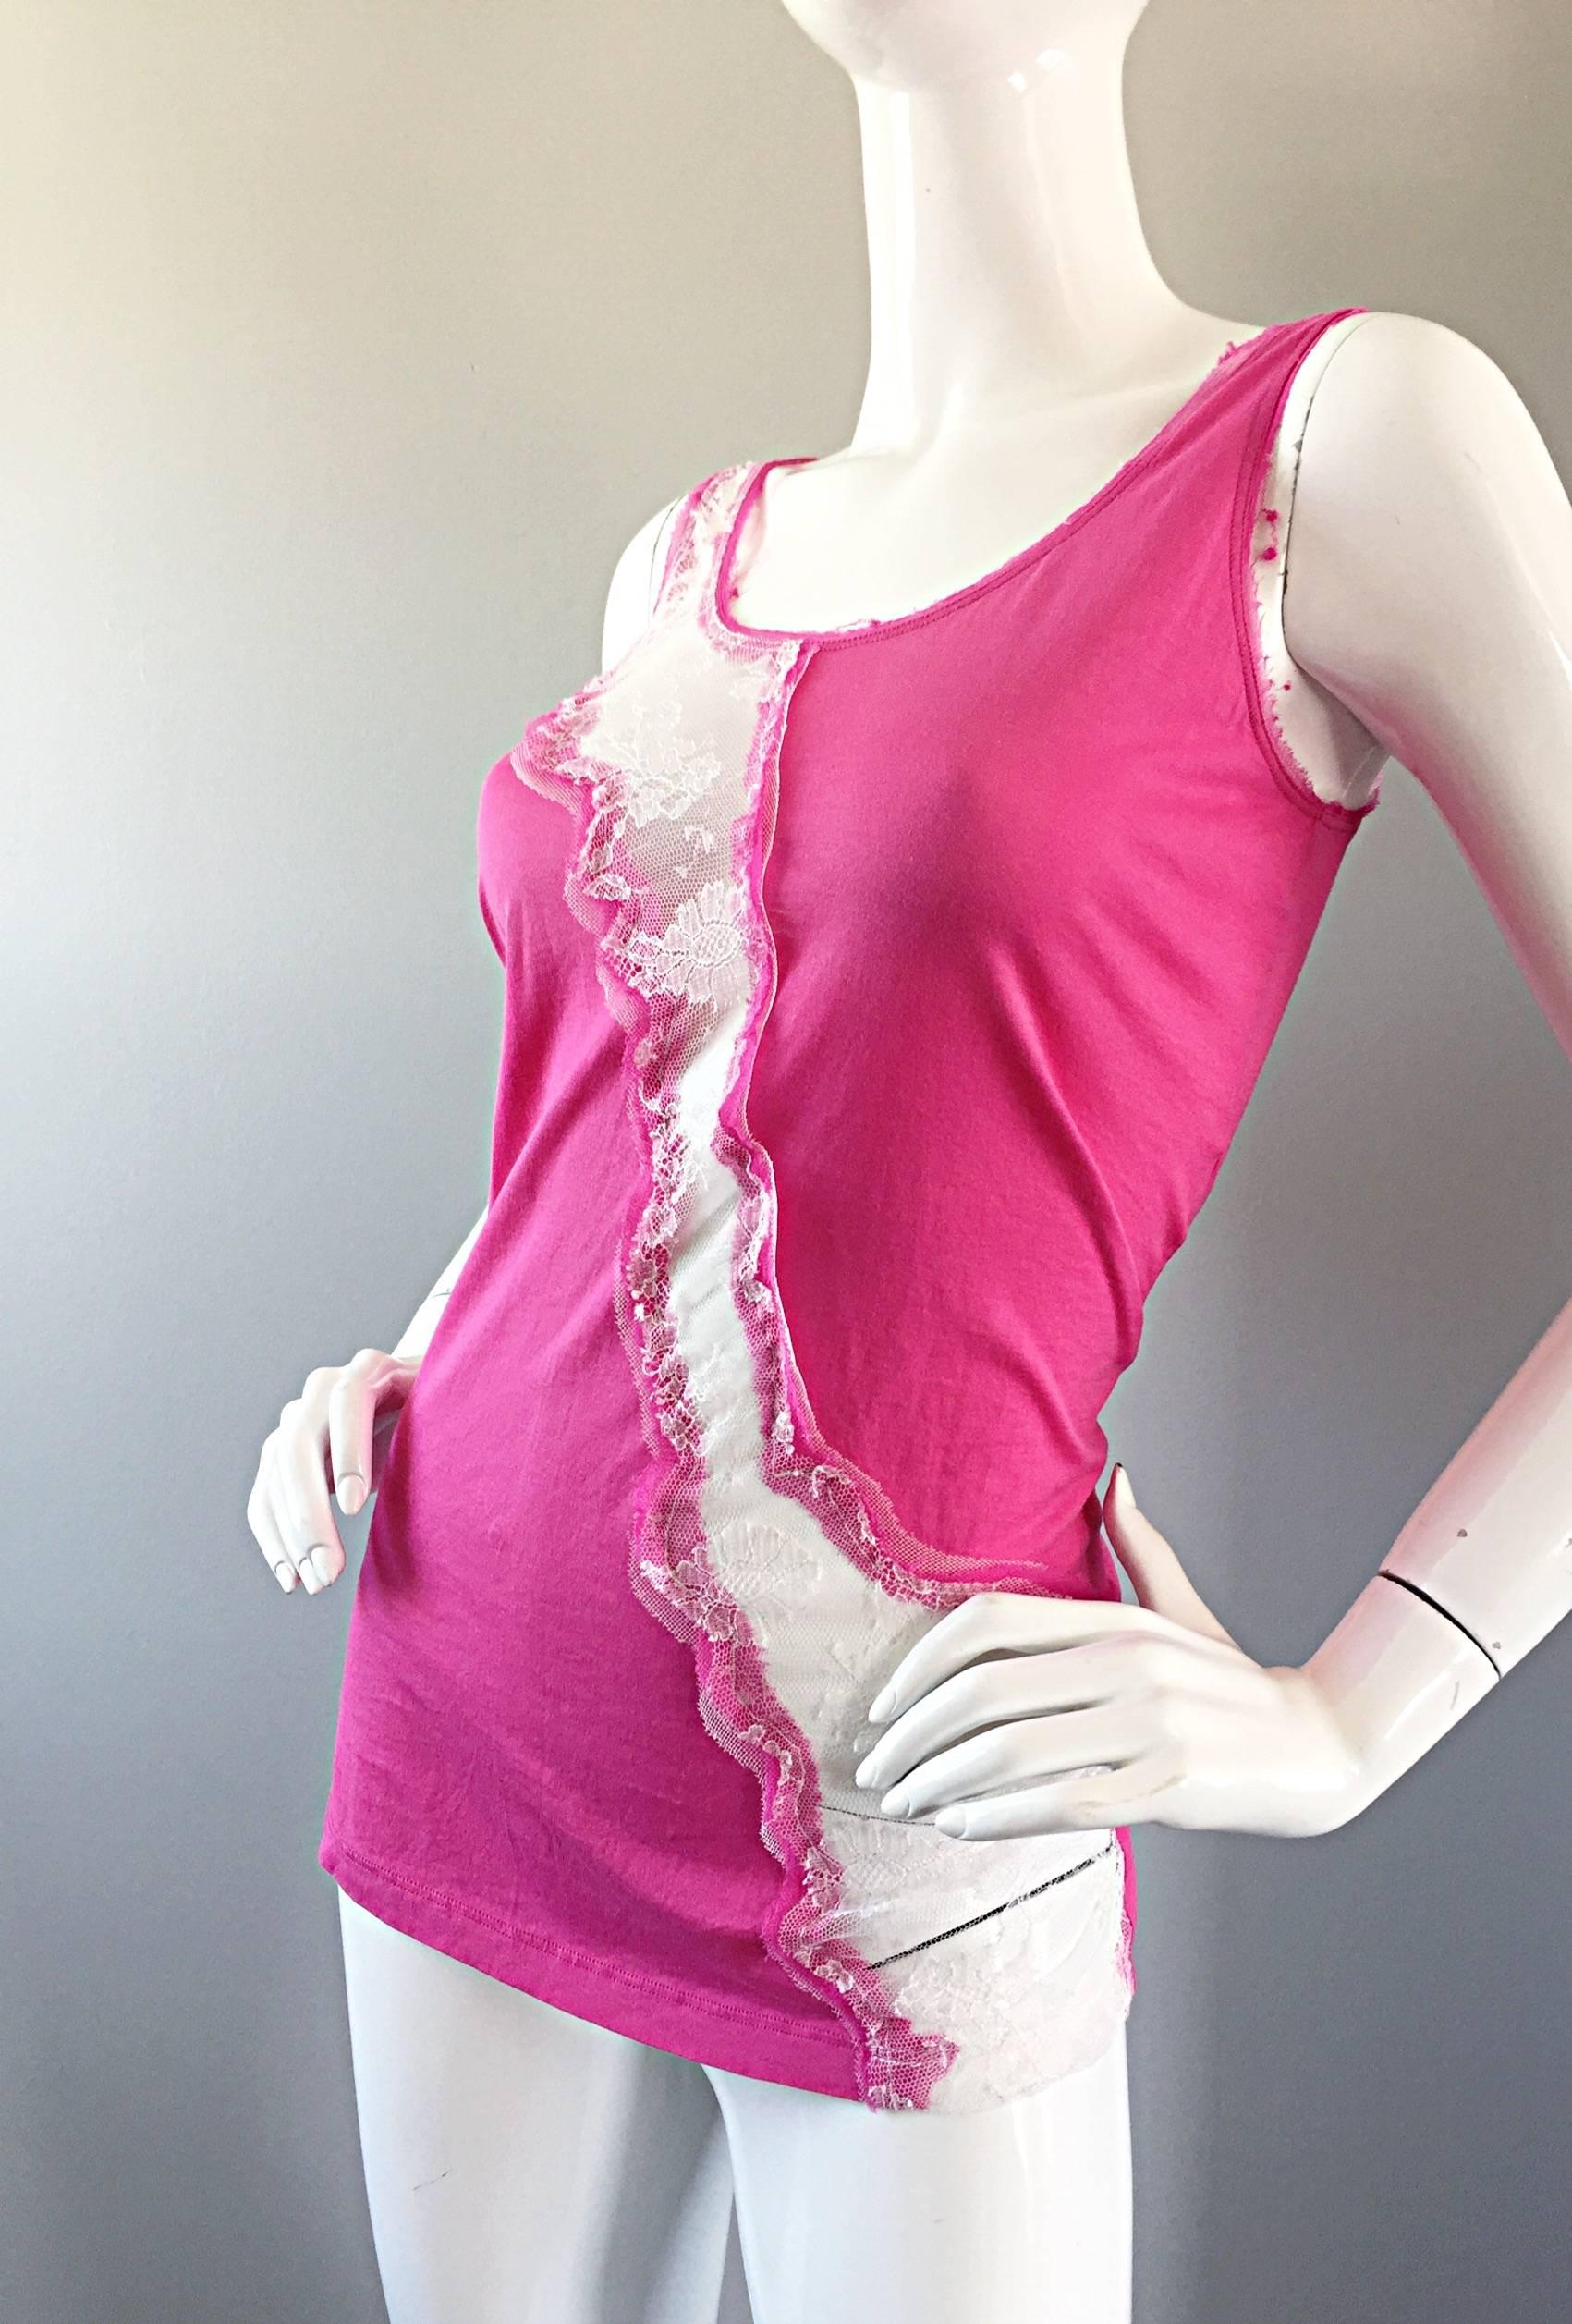 Women's John Galliano Hot Pink + White Sleeveless Cotton Blouse w/ Lace Cut - Outs  For Sale